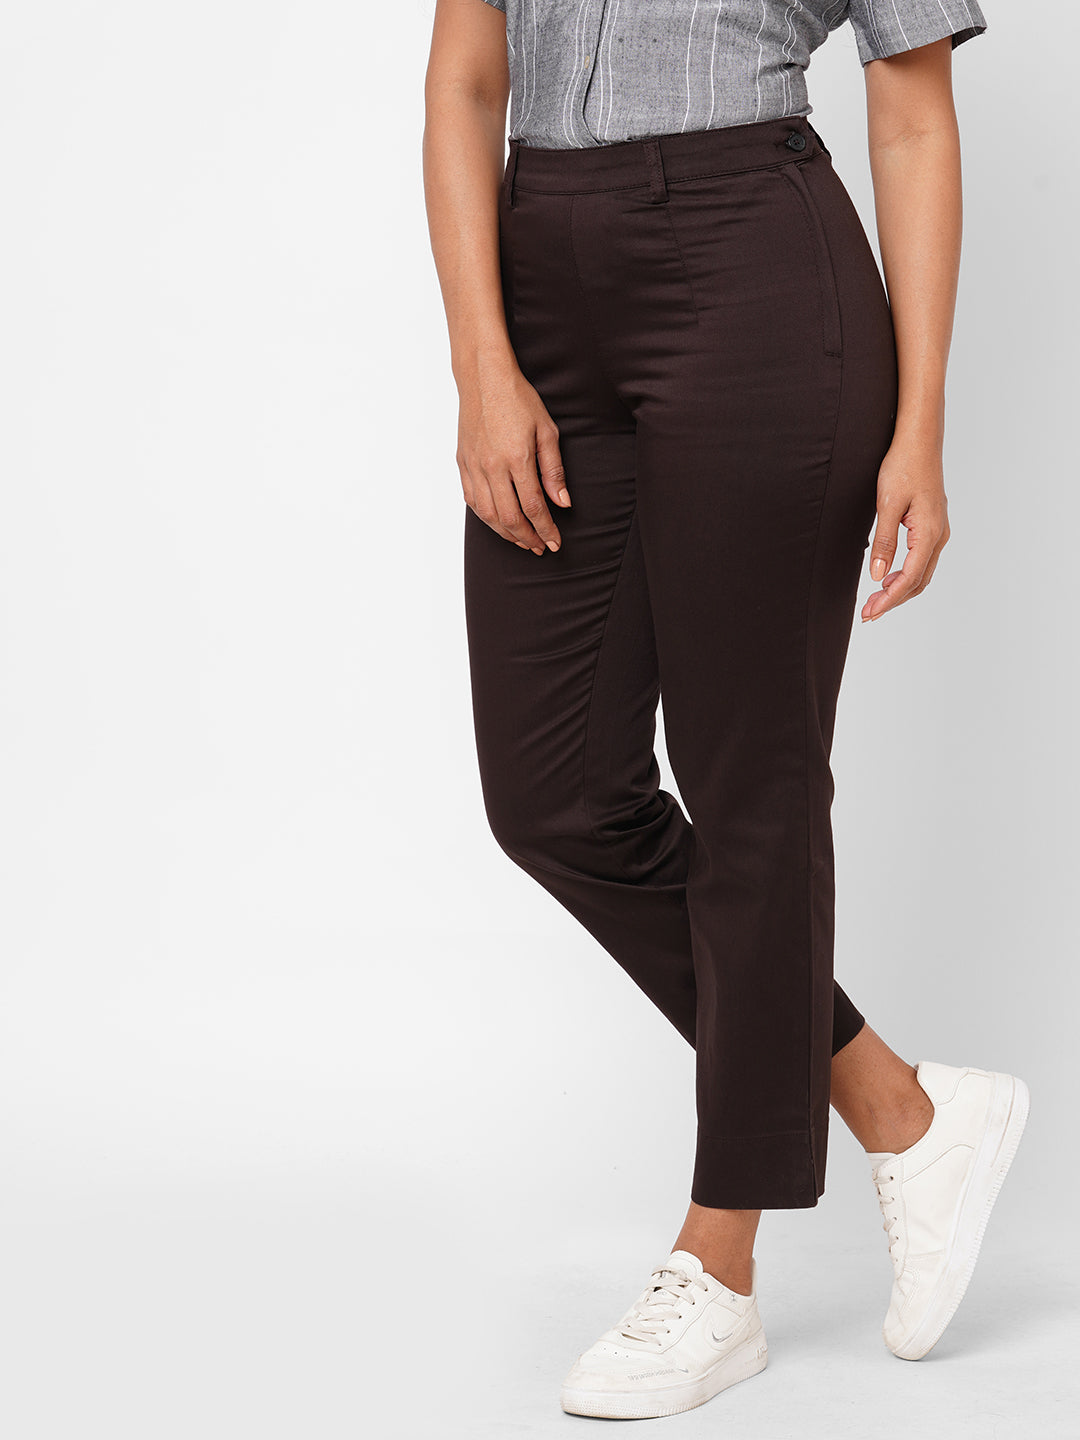 STYLERAGS Relaxed Women Black Trousers  Buy STYLERAGS Relaxed Women Black  Trousers Online at Best Prices in India  Flipkartcom